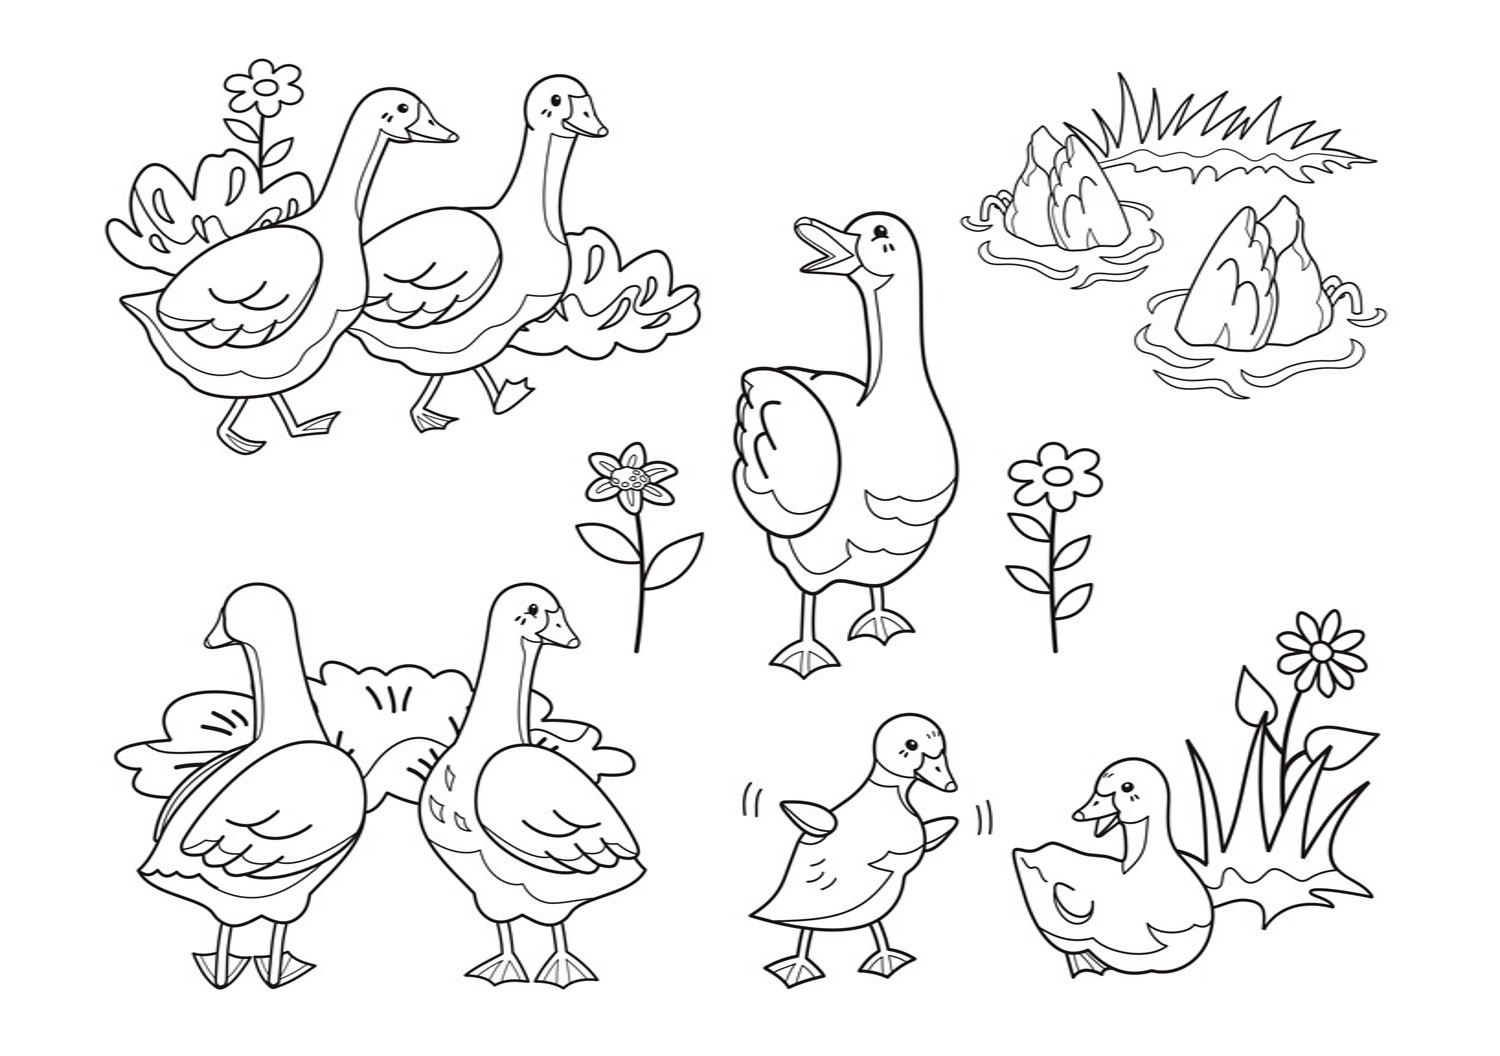 Coloring page of kawaii geese